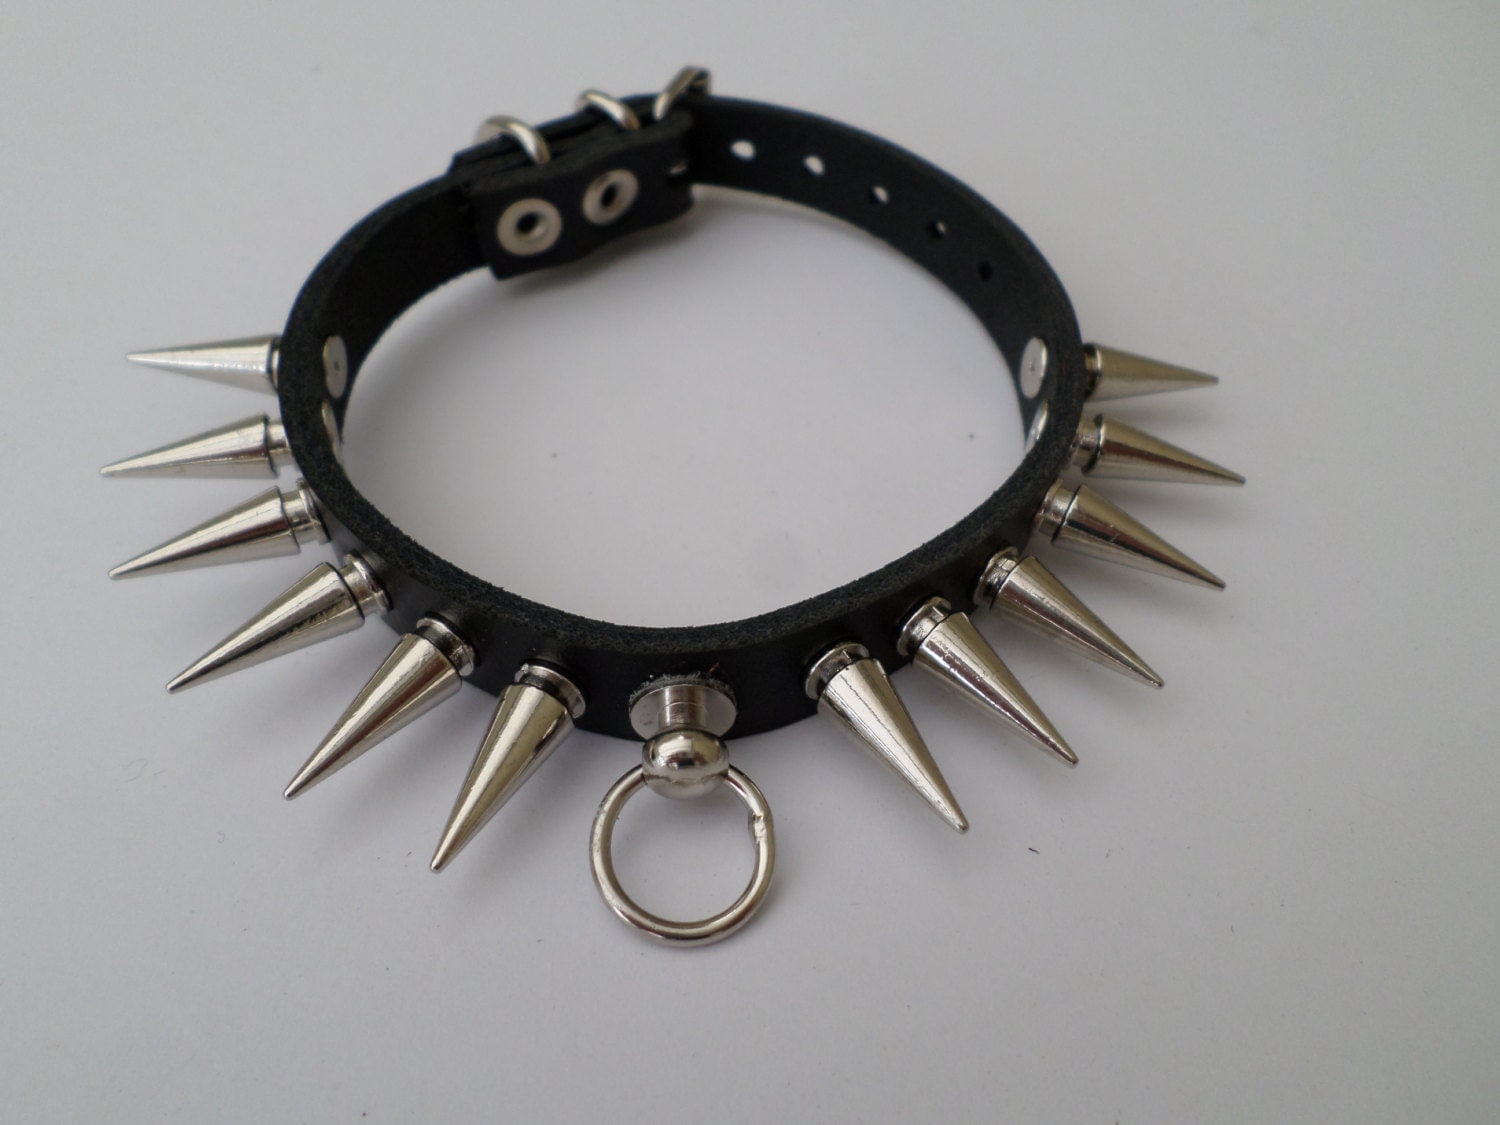 Chihuahua Spiked Dog Collar / Extra Small Spiked Dog